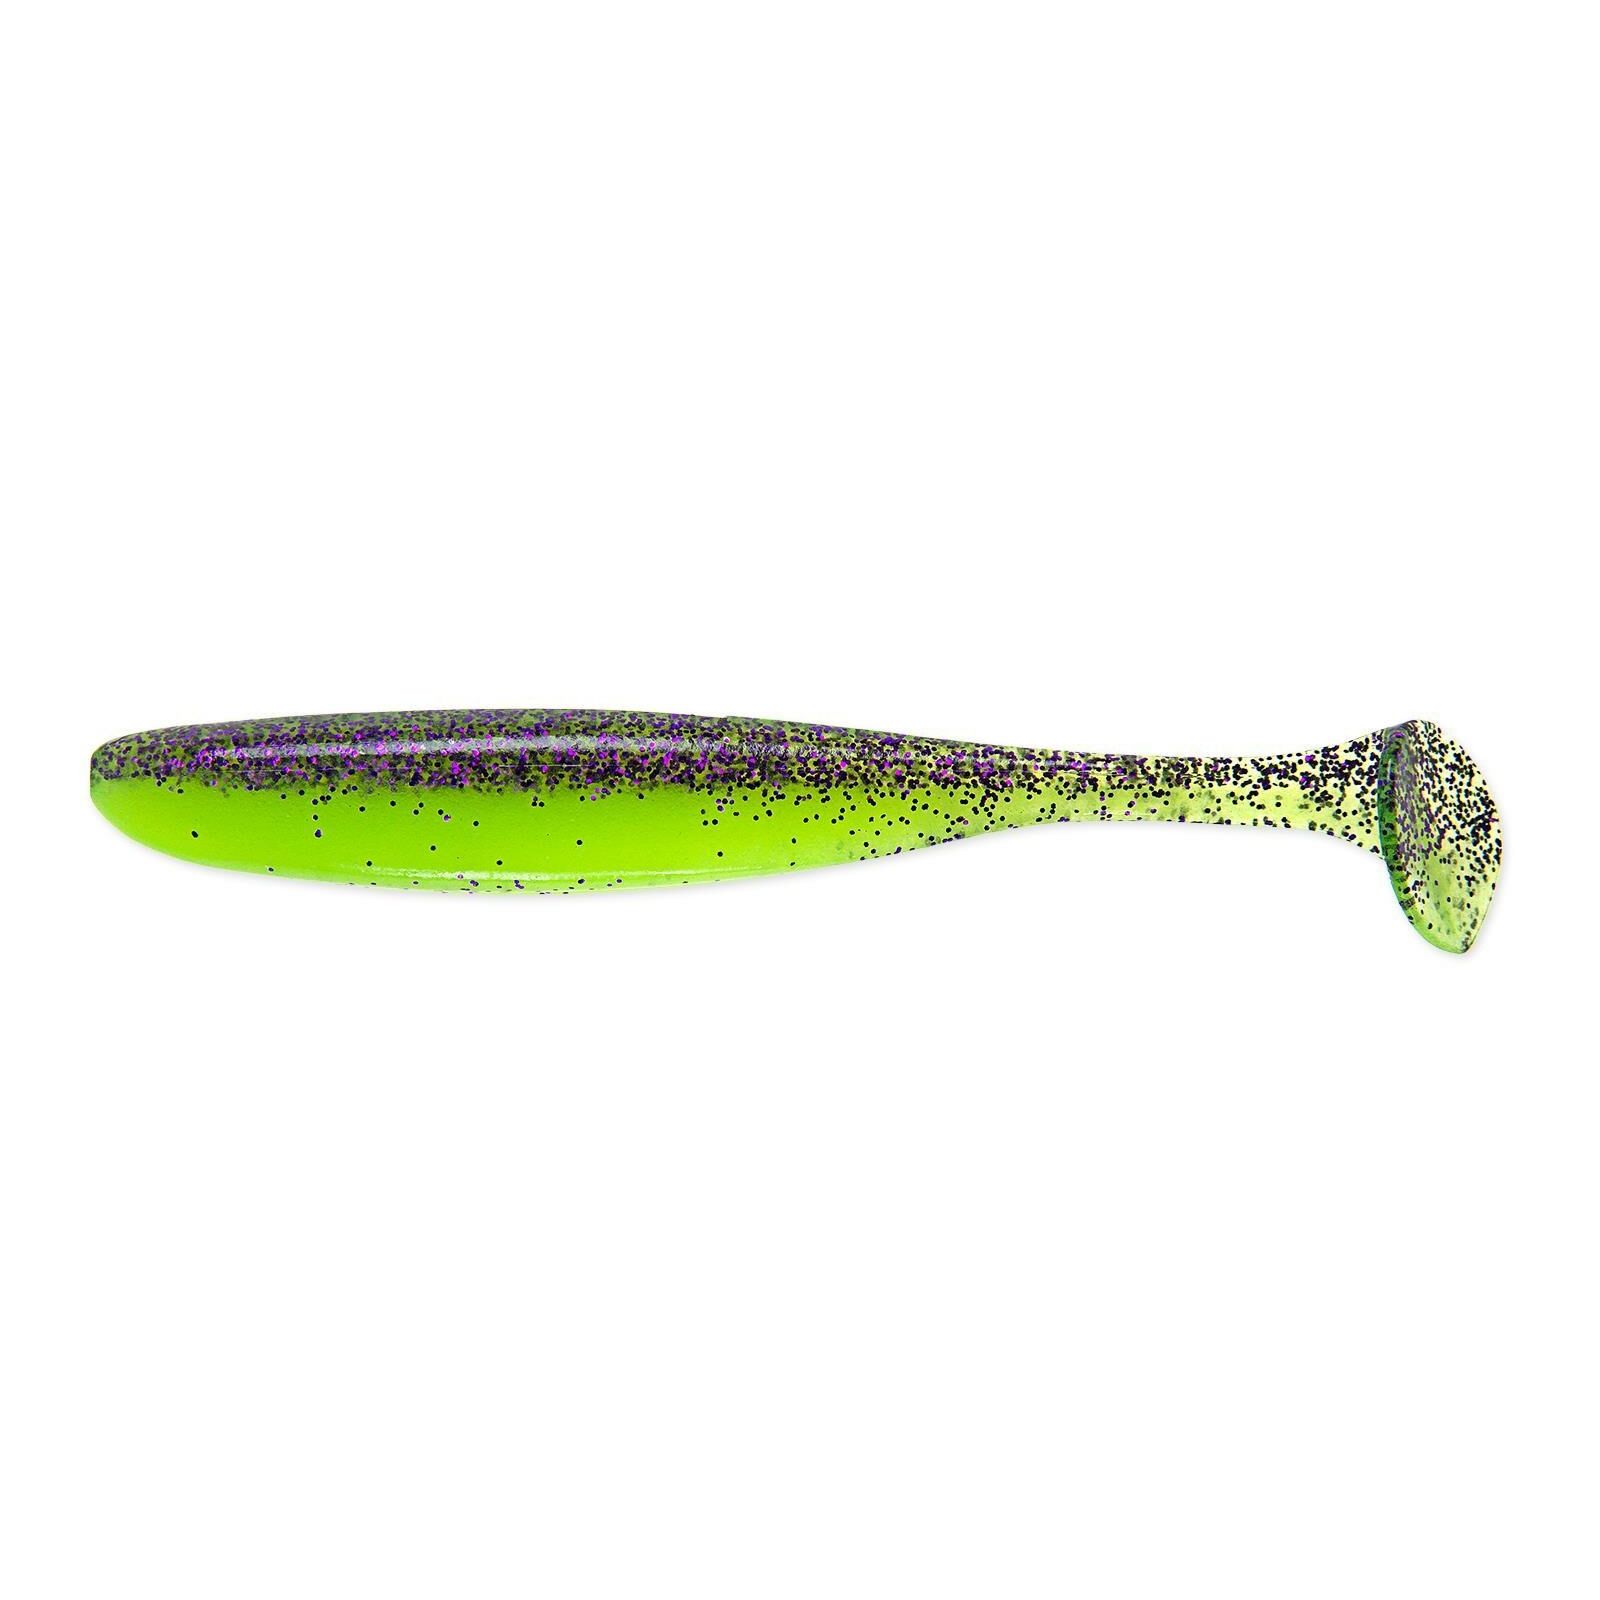 PURPLE CHARTREUSE EASY SHINER 3